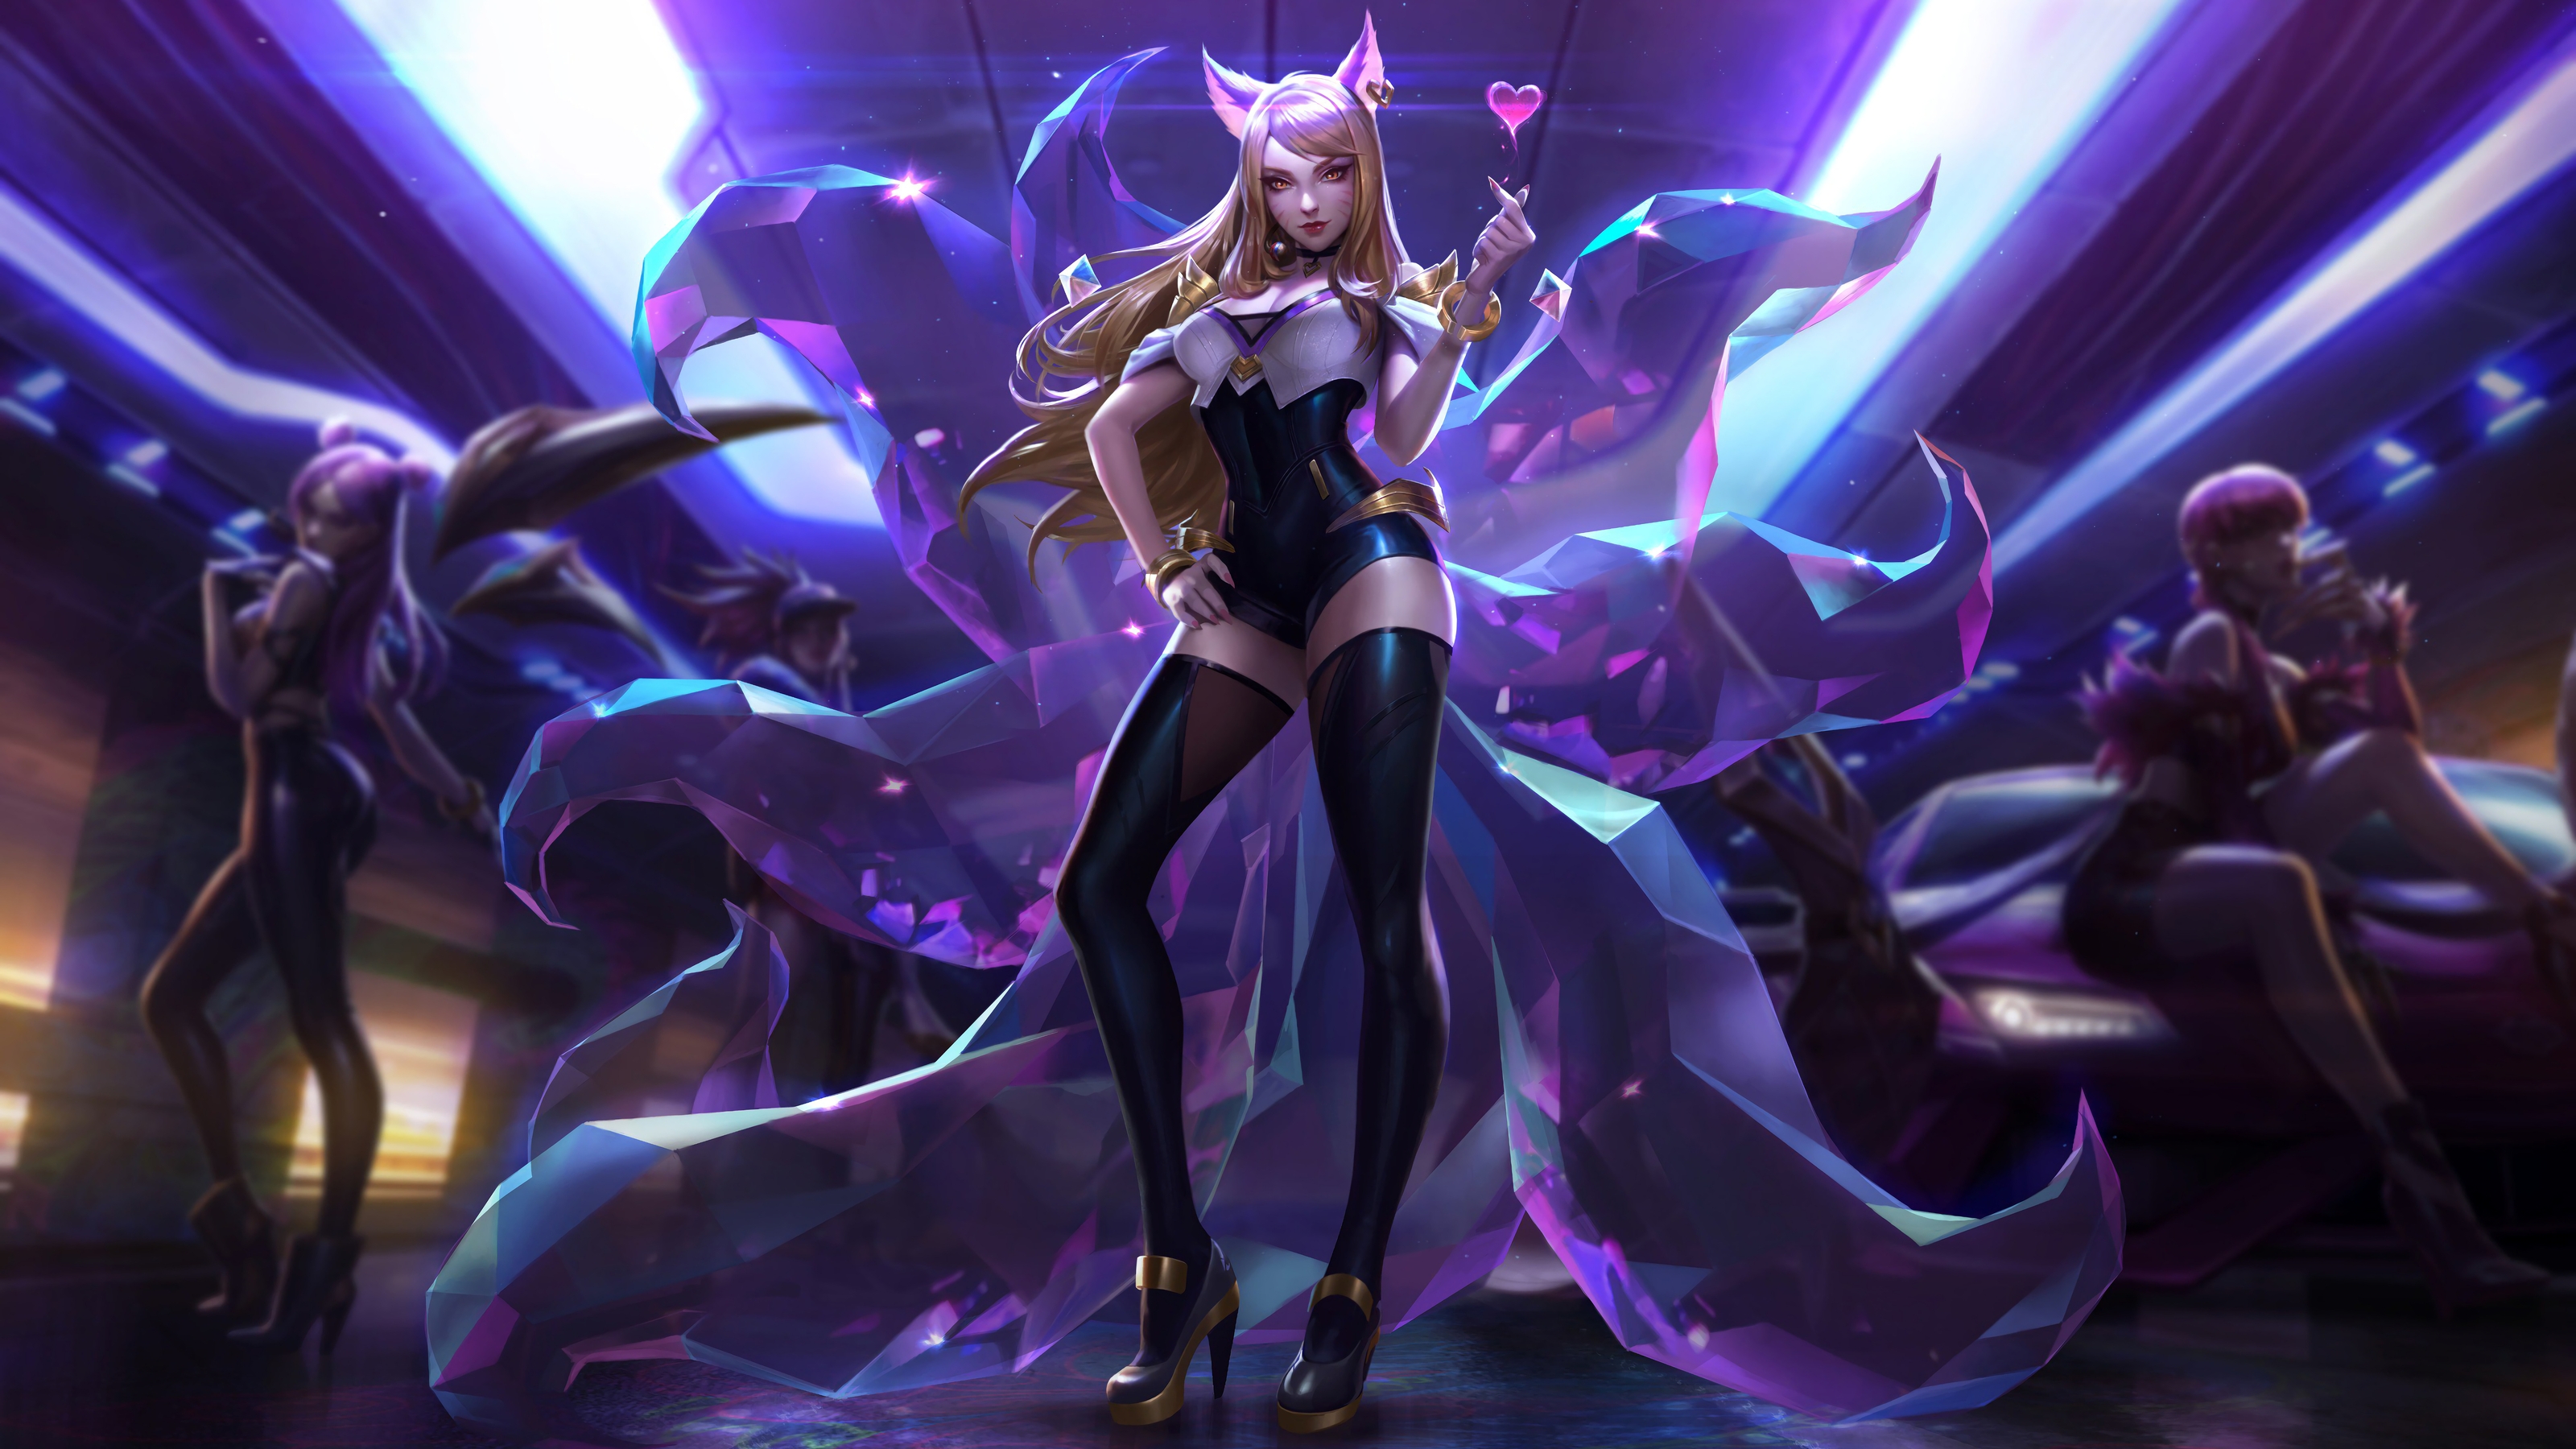 Image: KDA, League of Legends, Ahri, tails, clicking, heart, posture